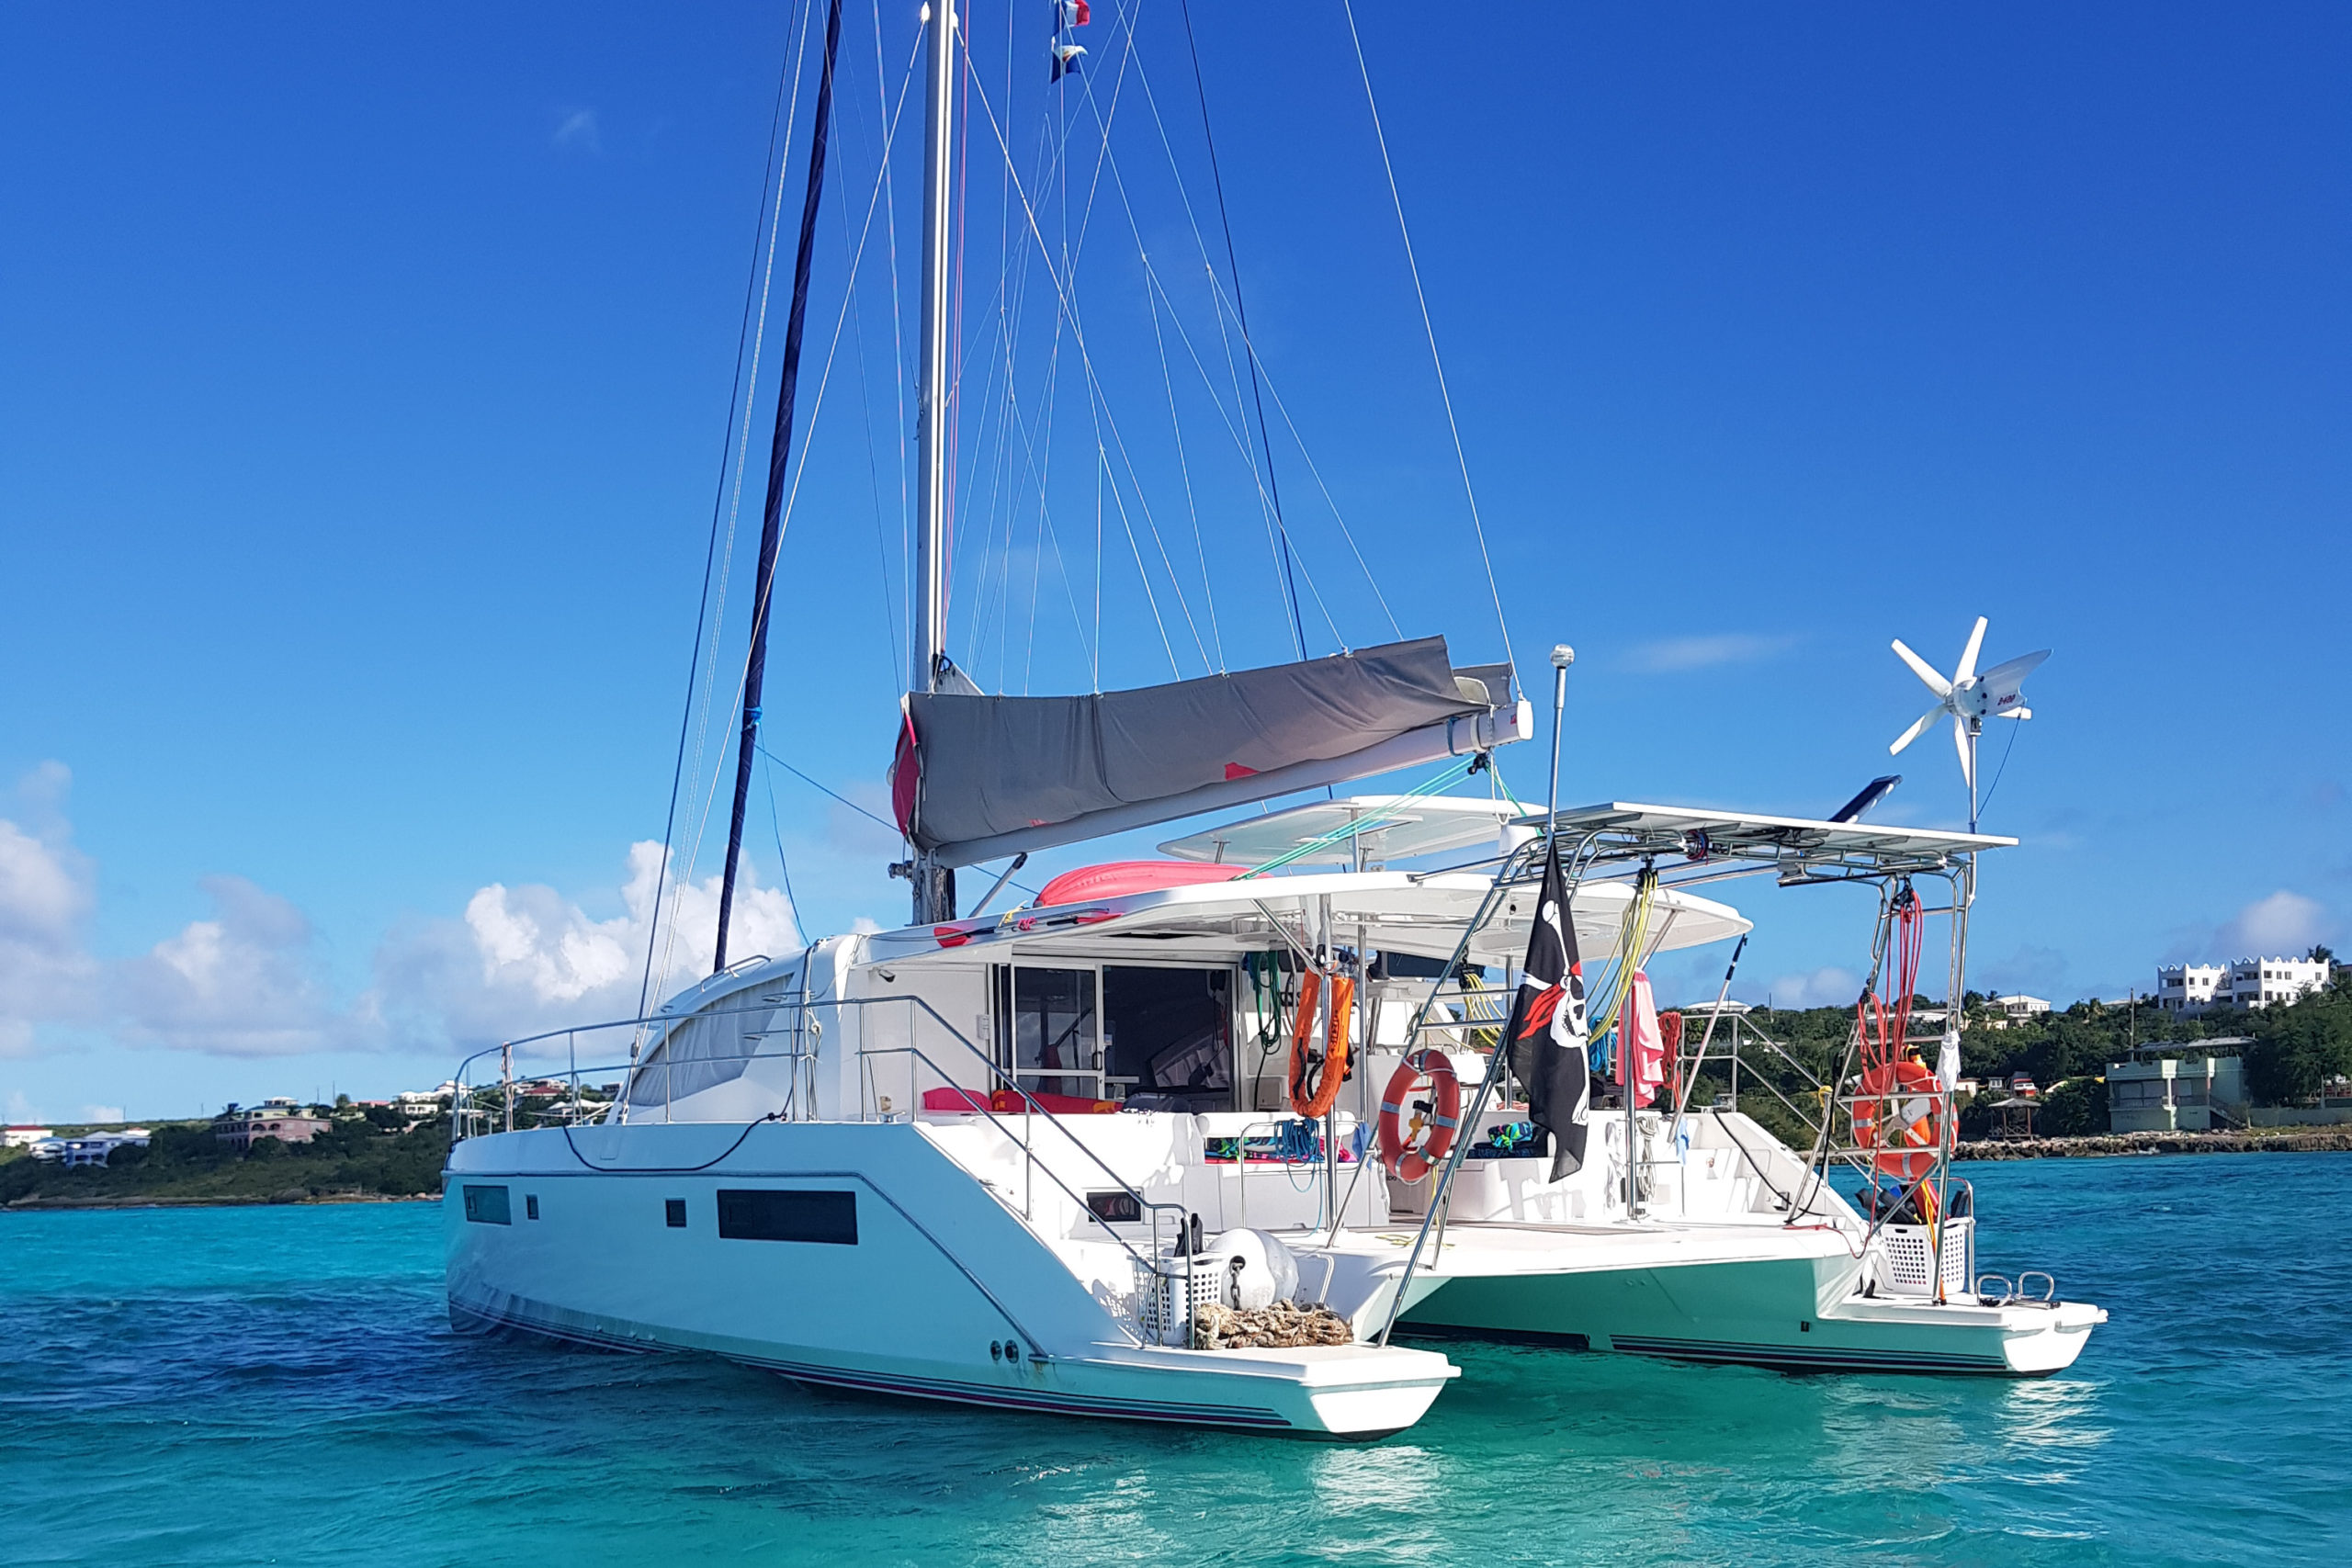 The catamaran "The Good Life" / Backward view from the dinghy on crystal-clear waters